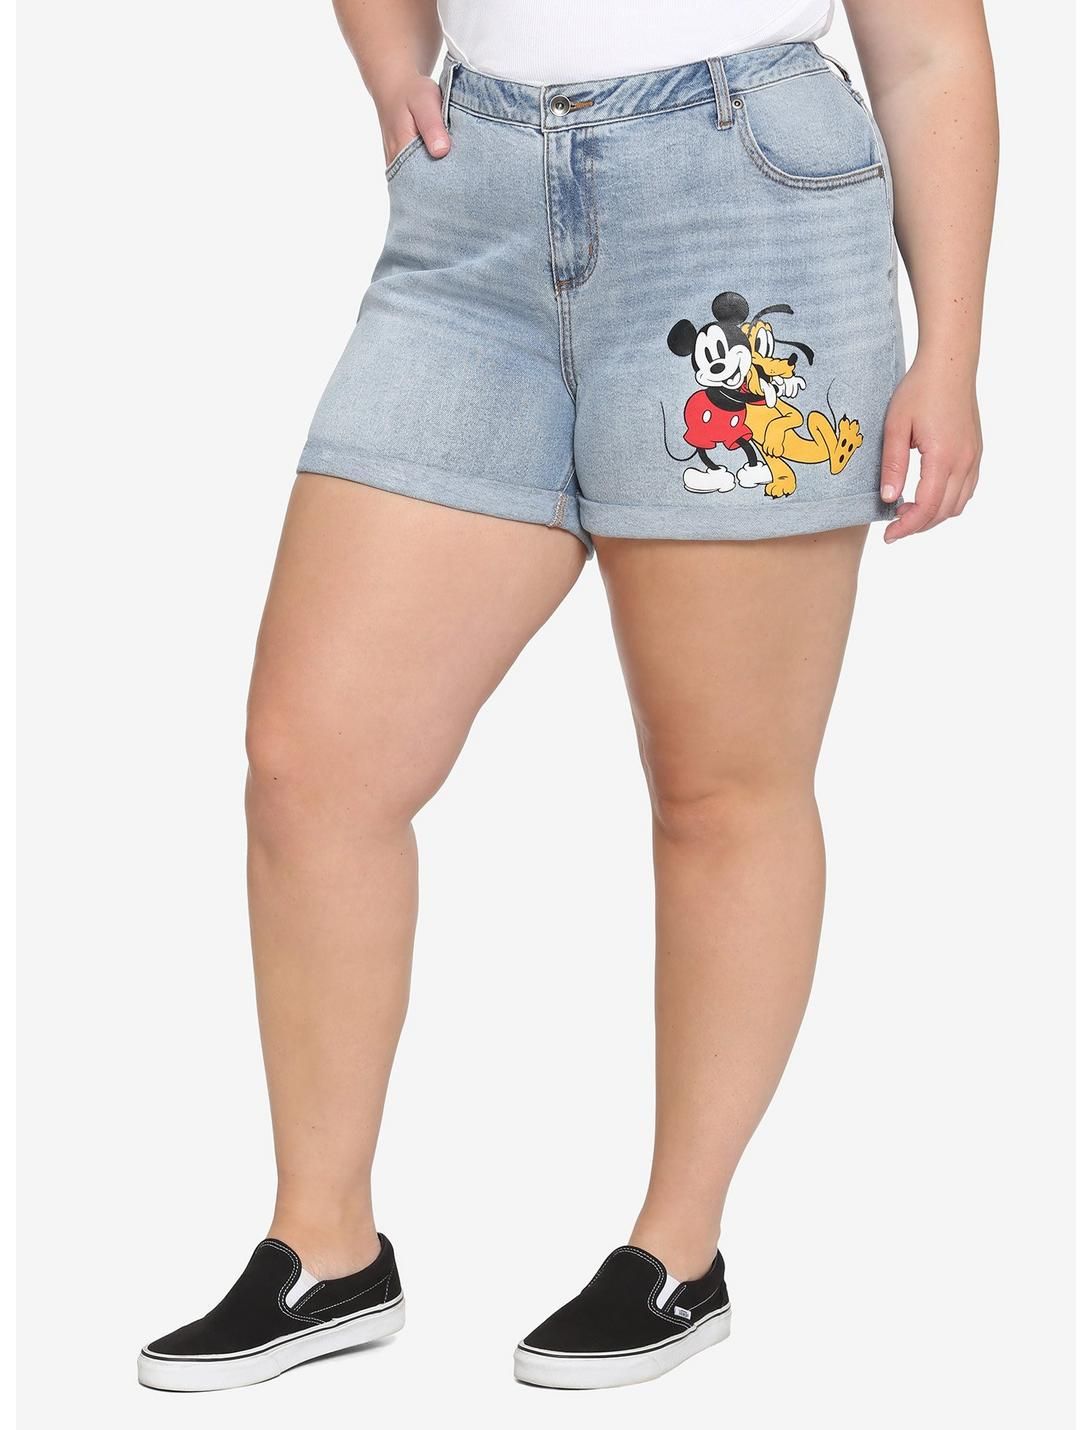 Disney Mickey Mouse & Pluto Mom Shorts Plus Size | Hot Topic